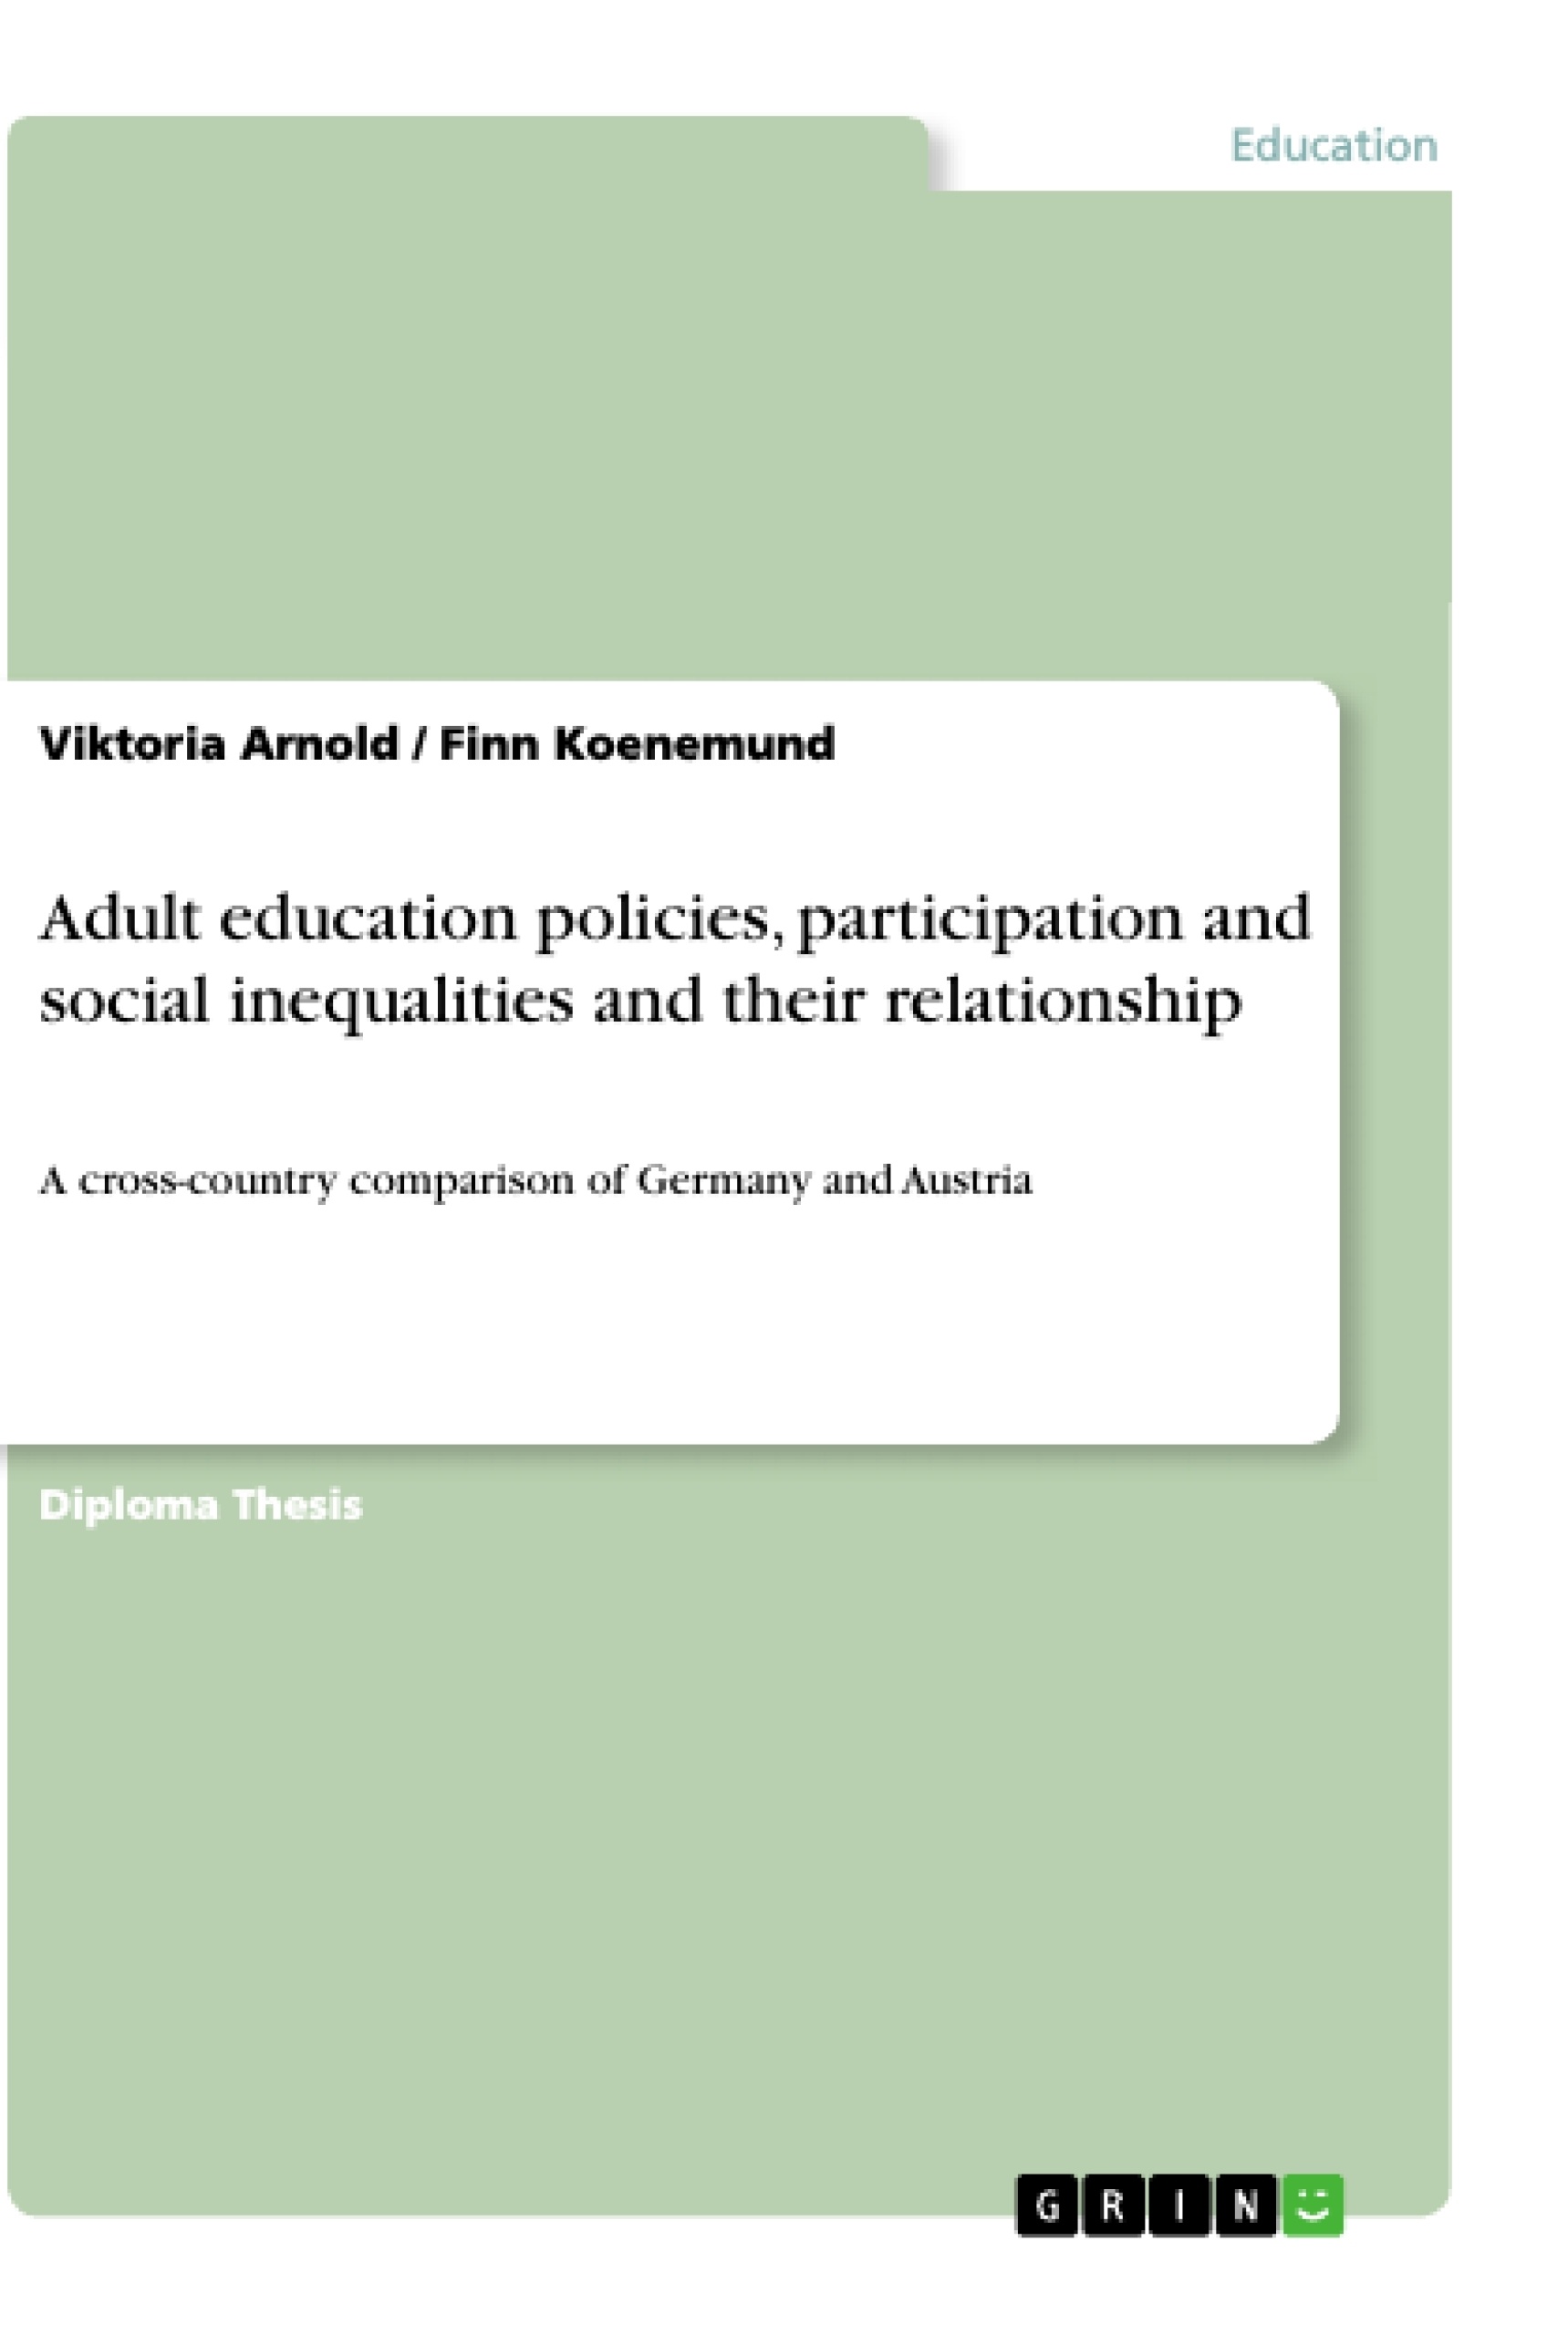 Title: Adult education policies, participation and social inequalities and their relationship